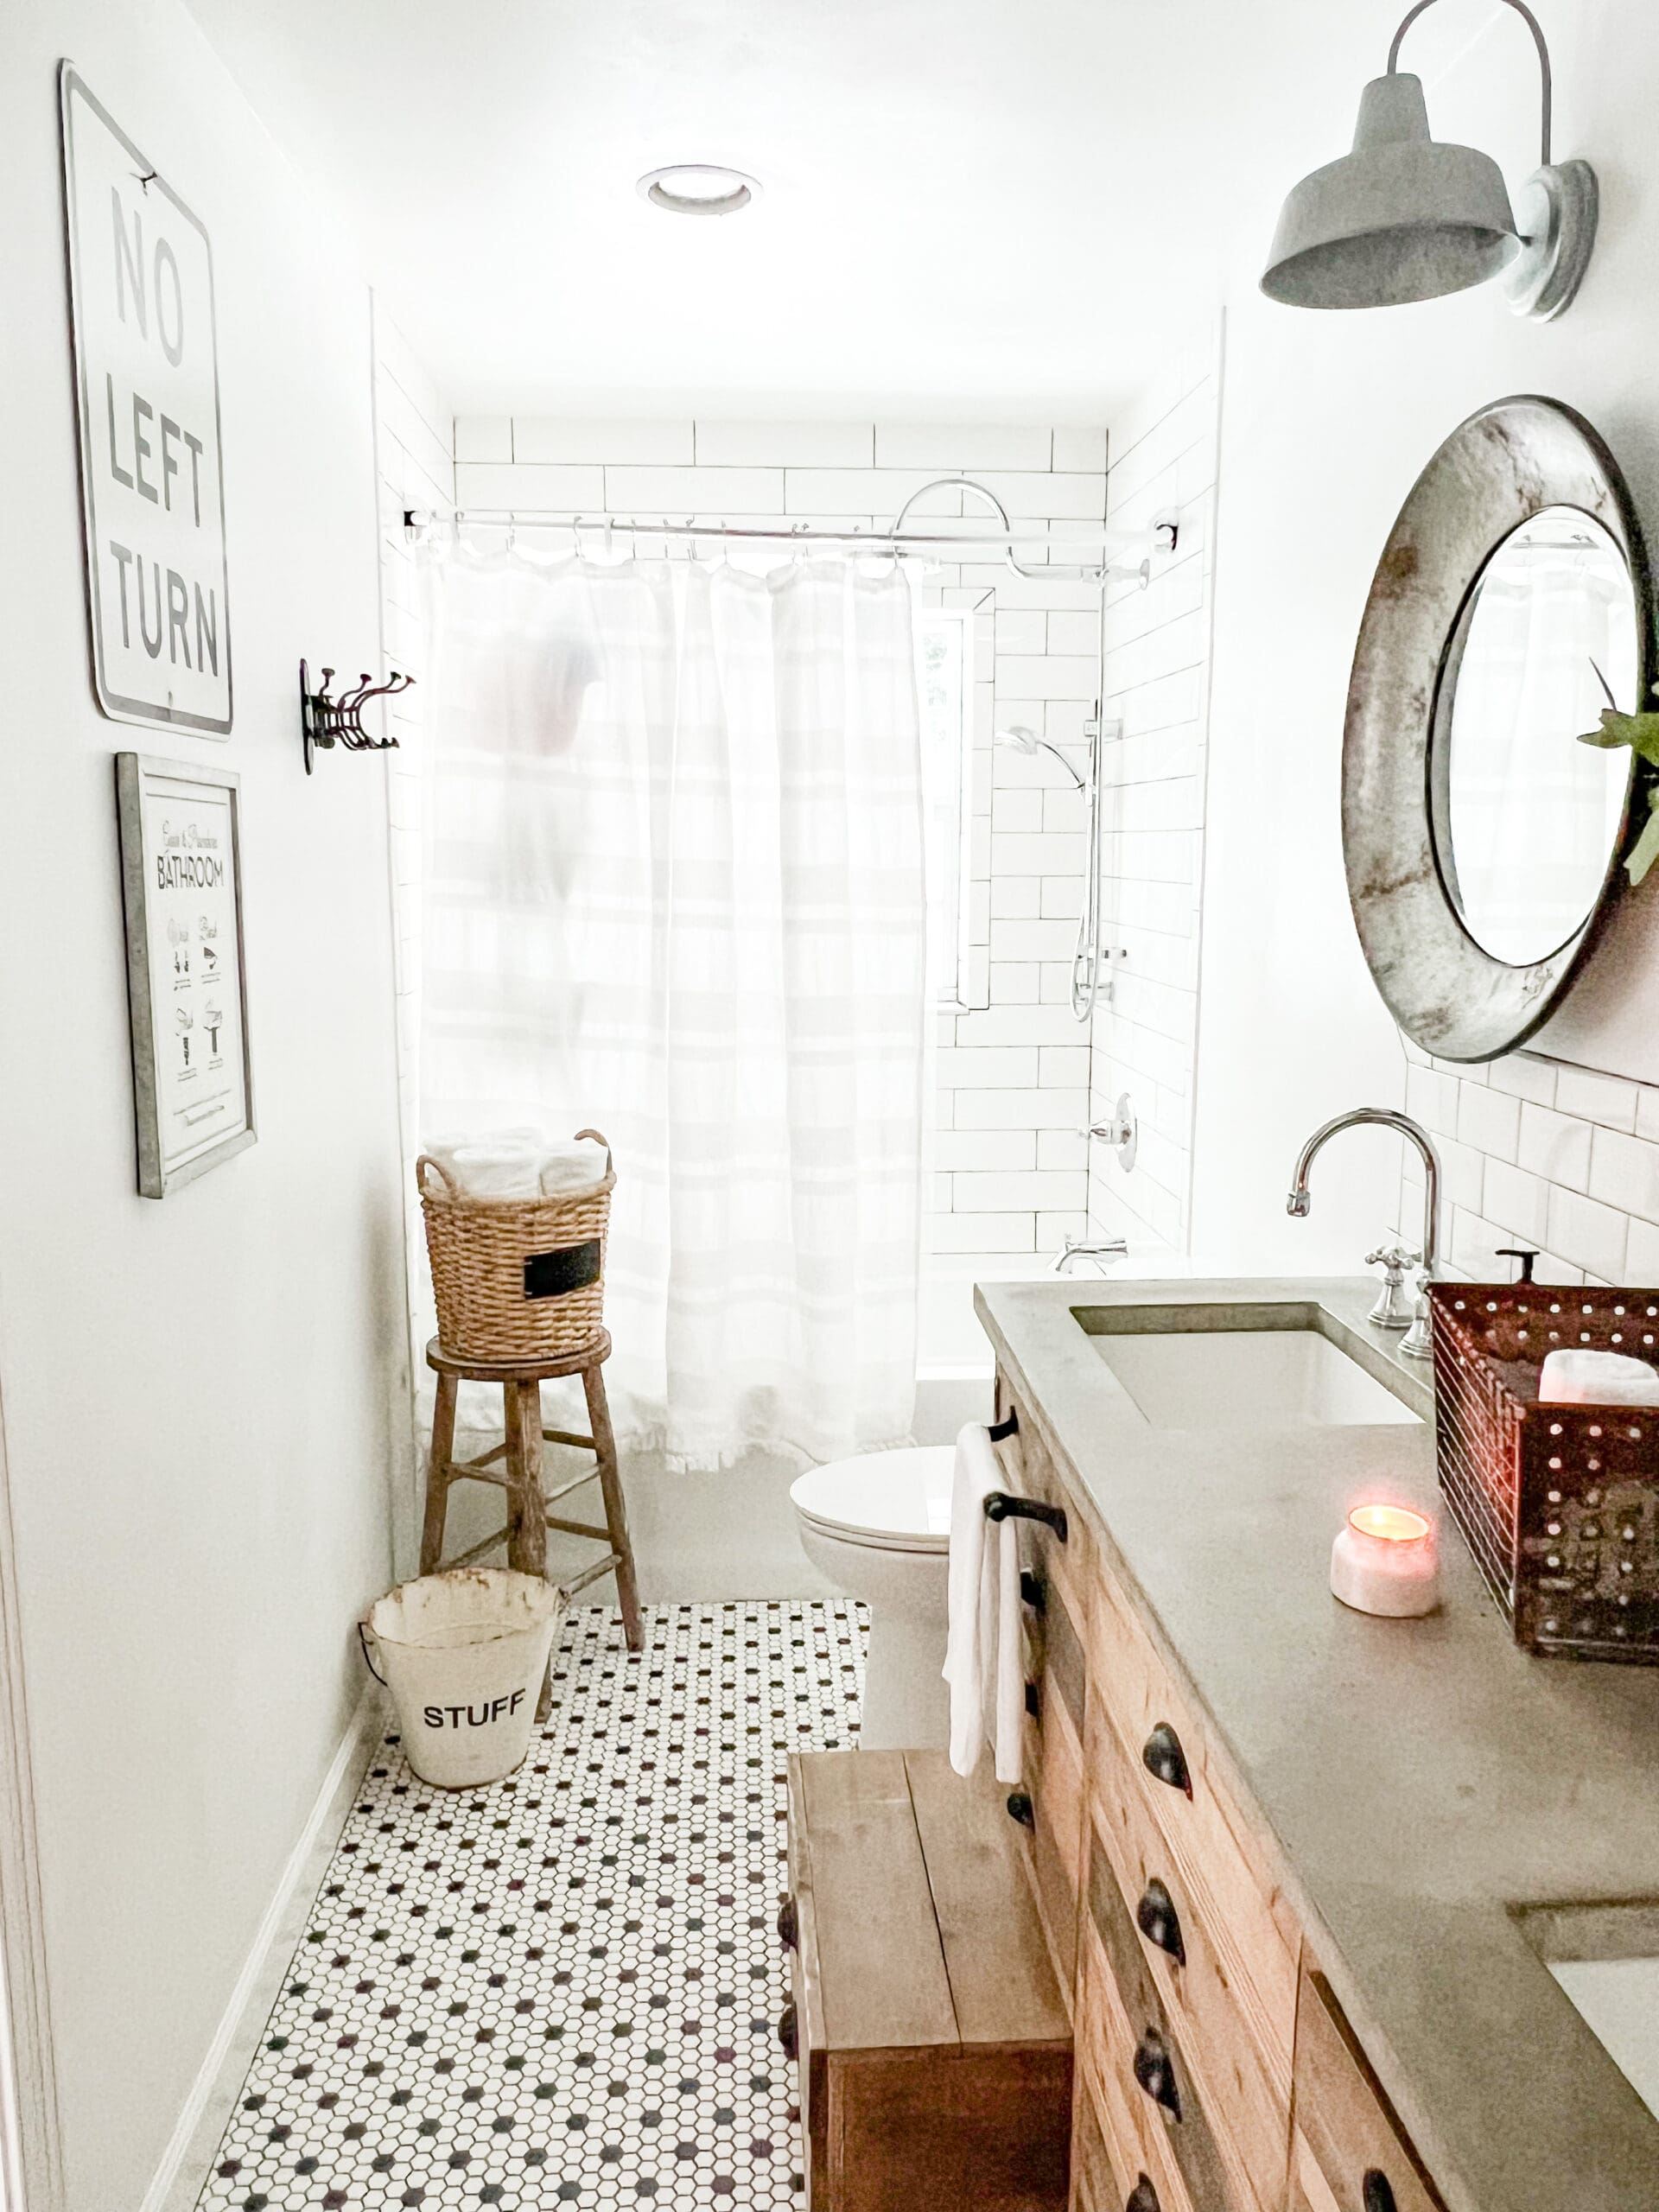 view of a beautiful neutral bathroom with a wood vanity and concrete countertop and small stool in the corner holding a basket of towels